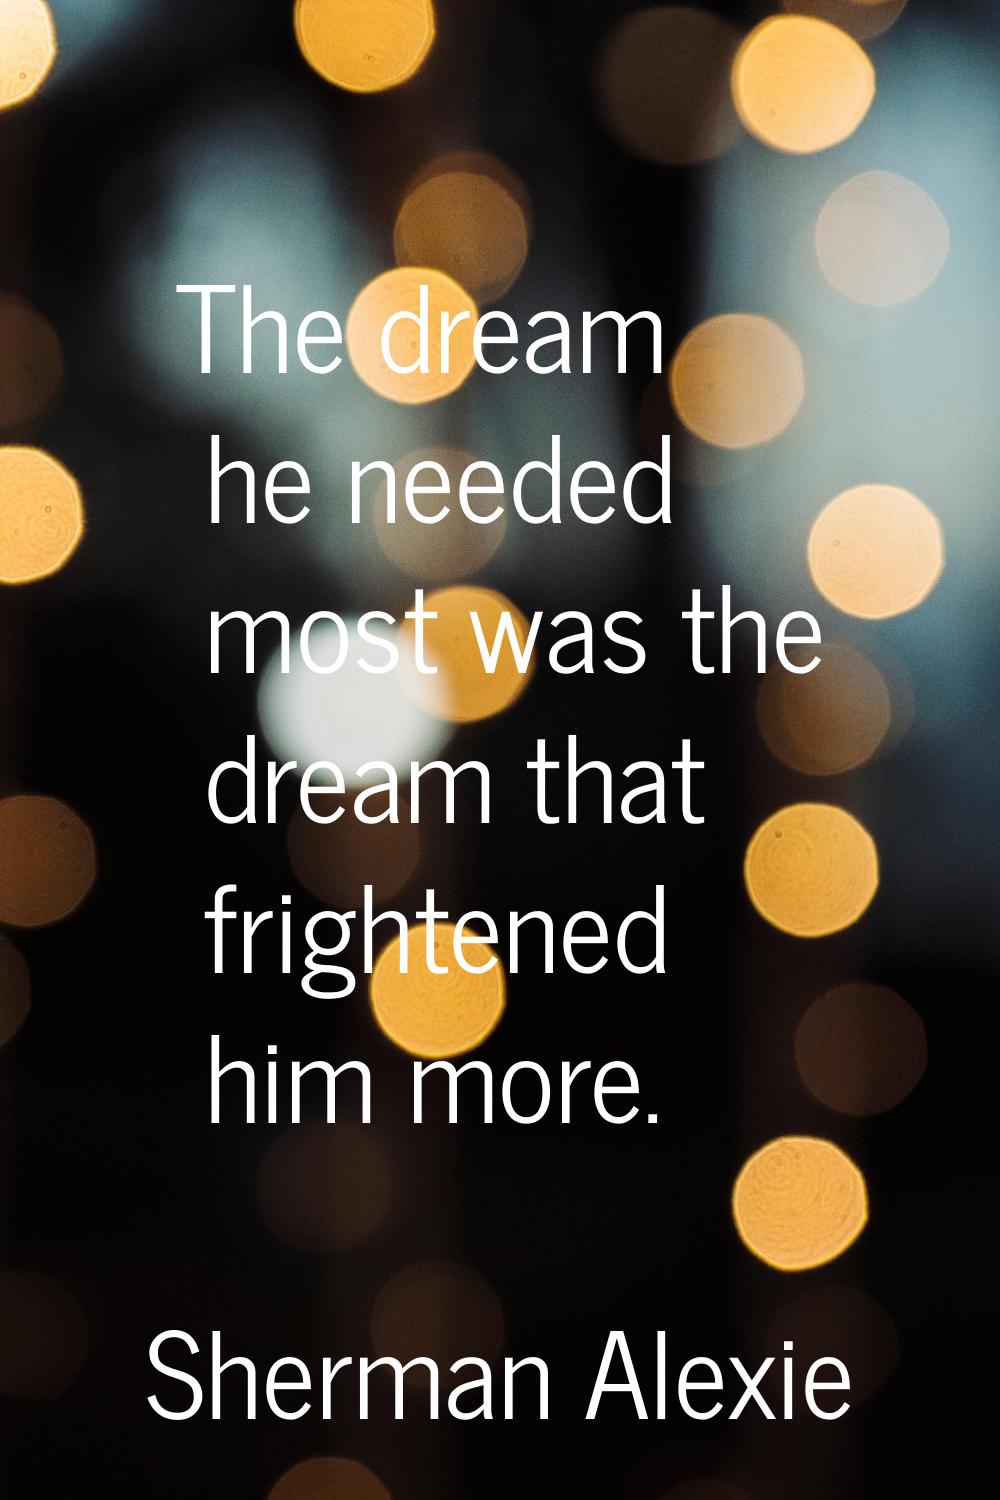 The dream he needed most was the dream that frightened him more.